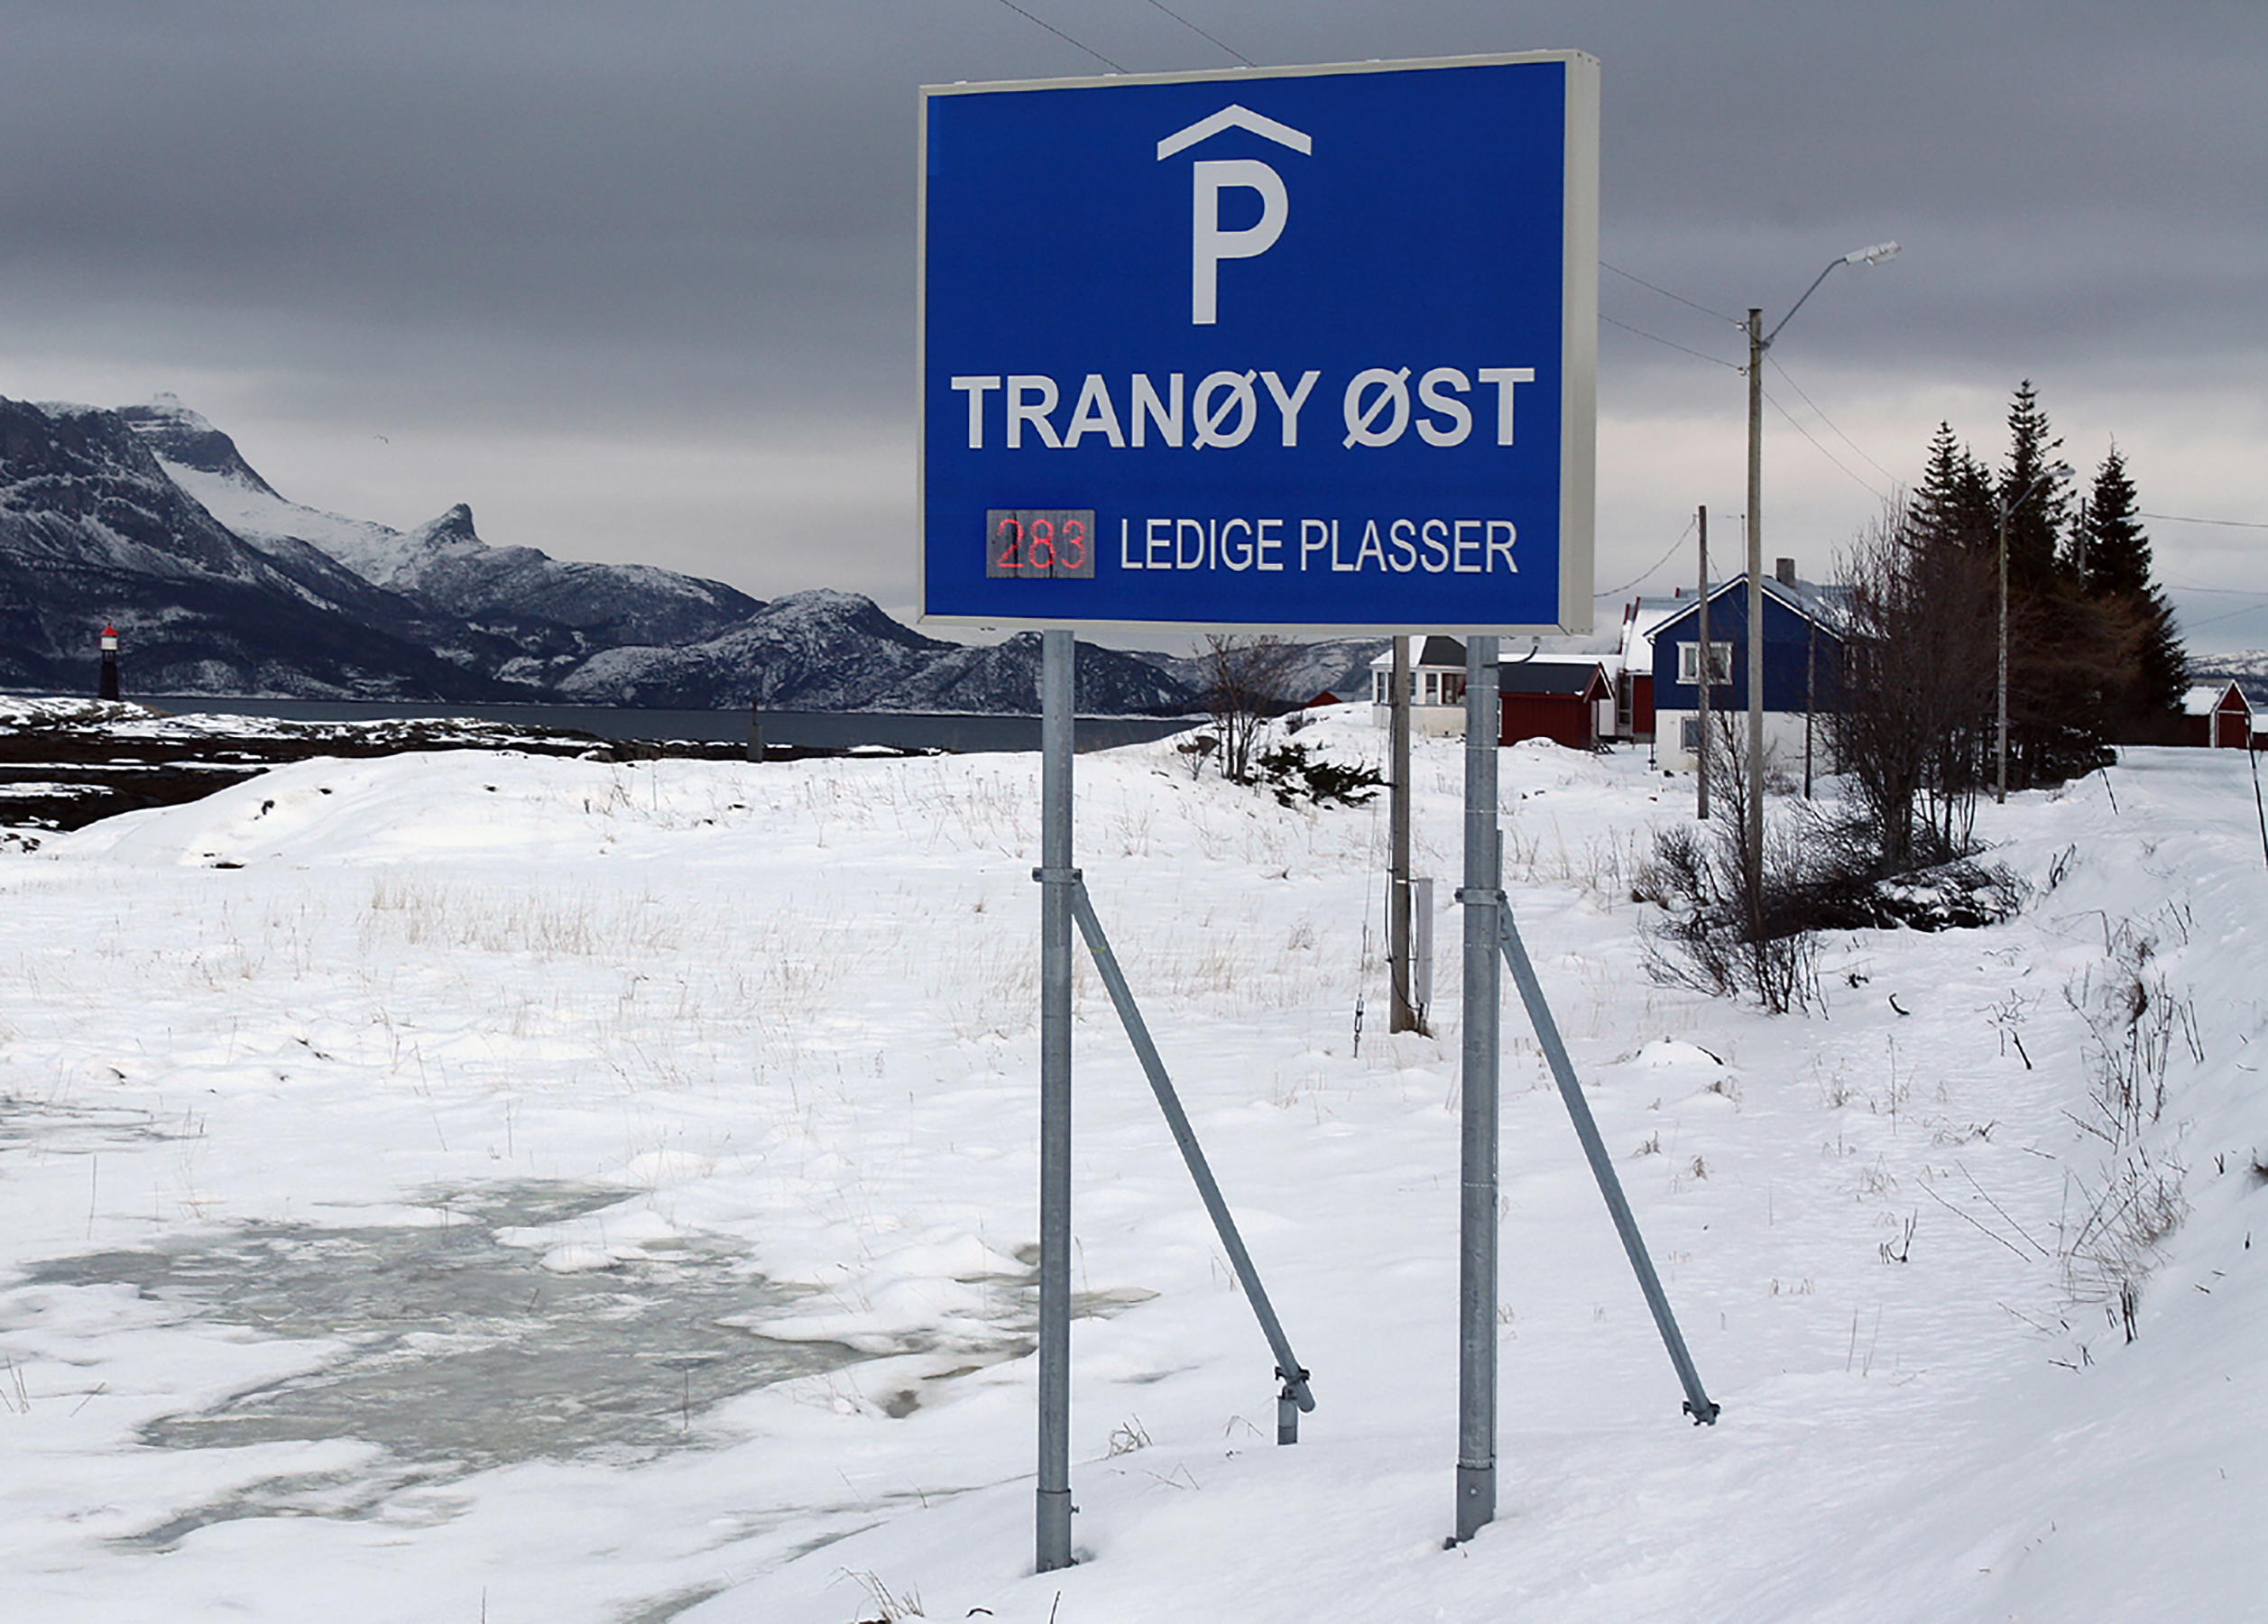 Artwork by Elmgreen & Dragset with a traffic sign installed to Tranøy road side in Norway.